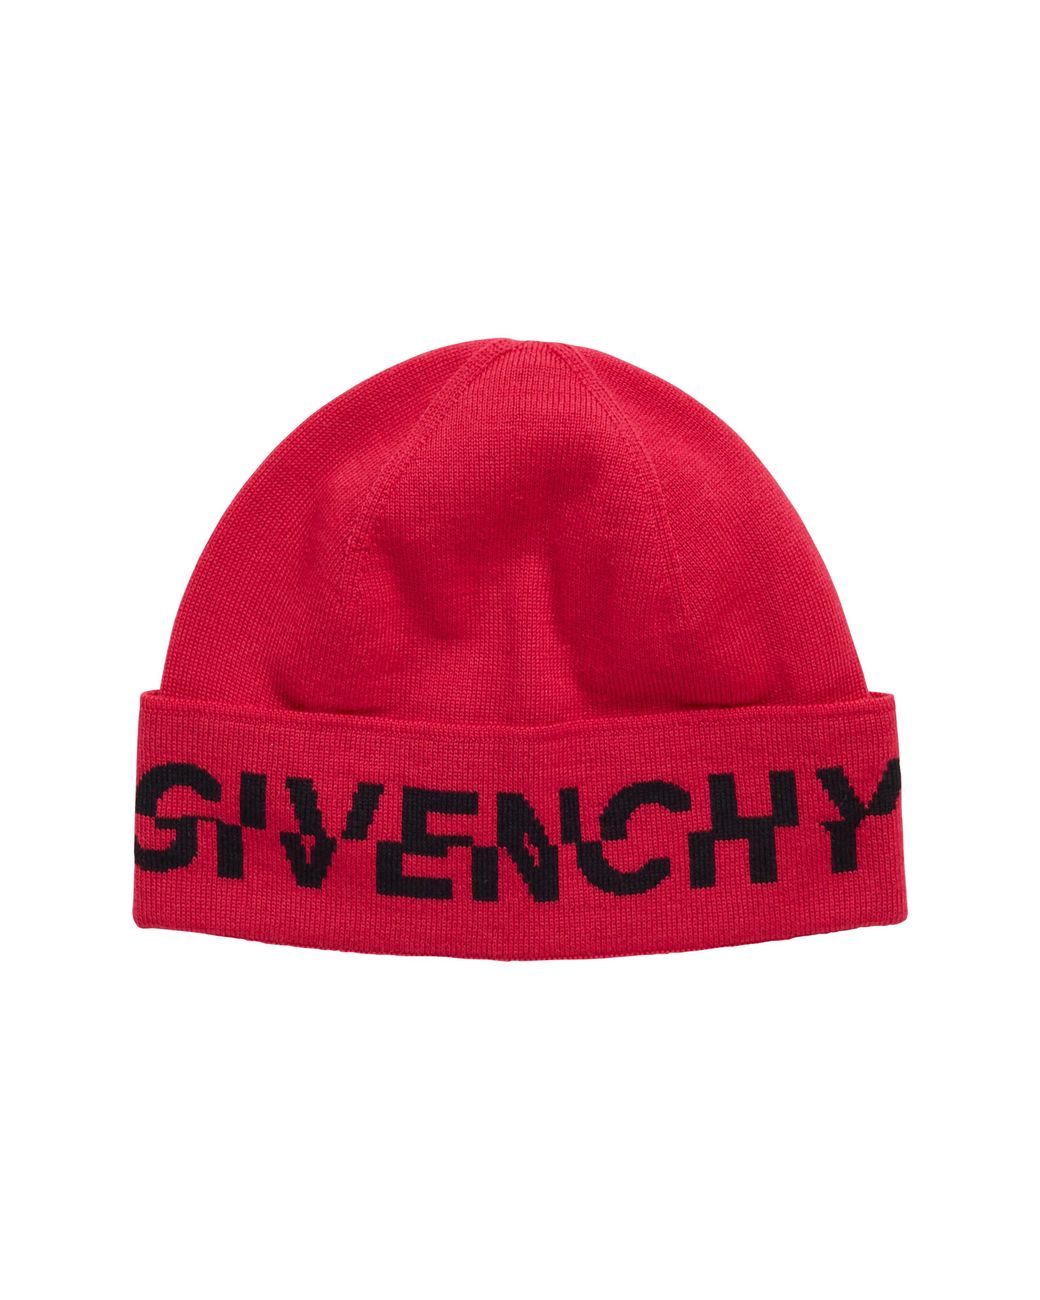 Givenchy Knit Beanie In Fuschia At Nordstrom Rack in Red | Lyst